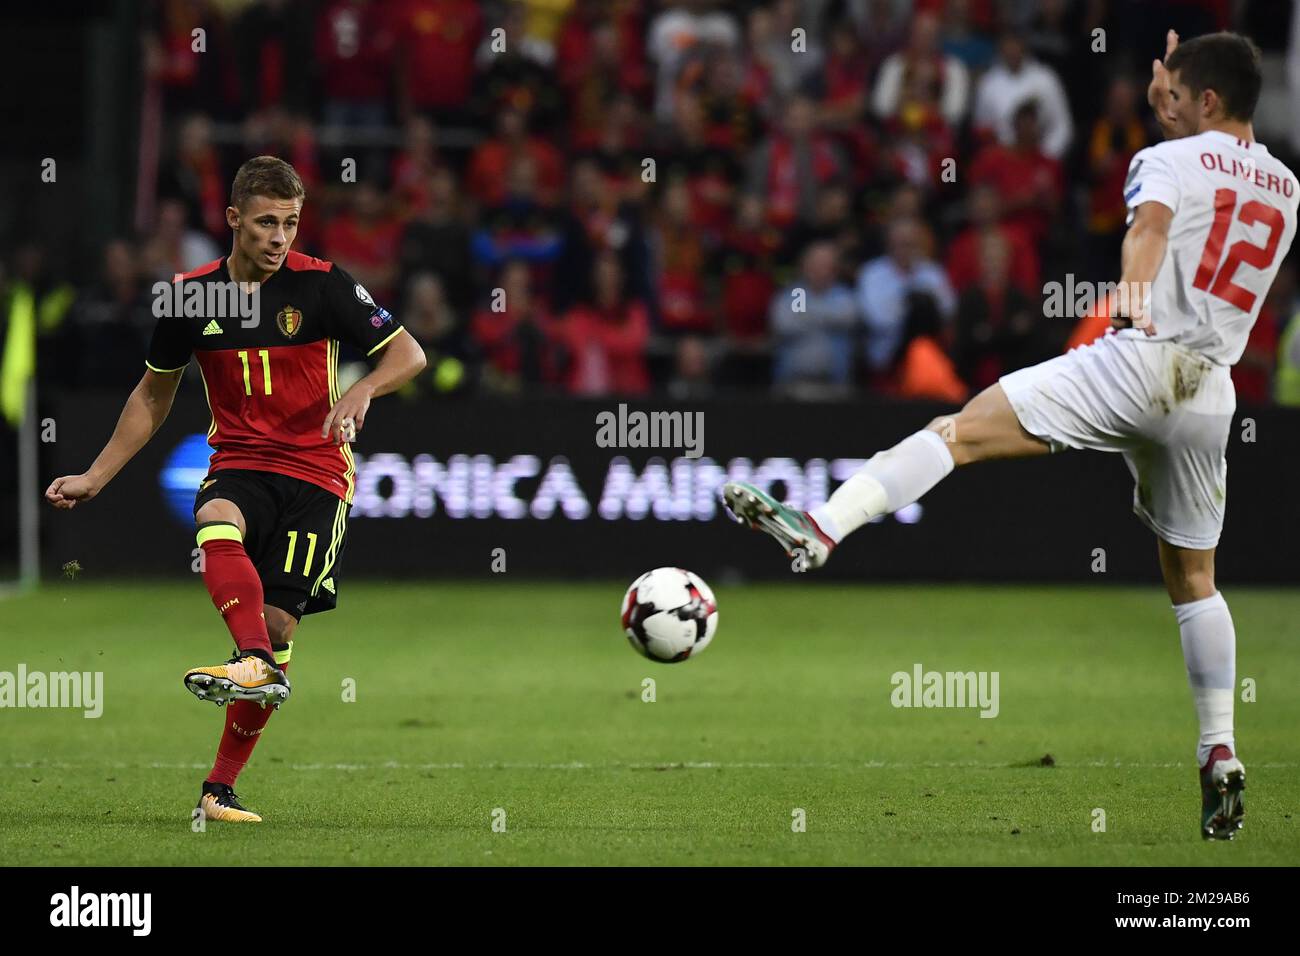 Belgium's Thorgan Hazard and Gibraltar's Jayce Mascarenhas-Olivero pictured in action during a soccer between Belgian national soccer team Red Devils and Gibraltar, a World Cup 2018 qualification game in Group H, Thursday 31 August 2017 in Liege, Belgium. BELGA PHOTO DIRK WAEM Stock Photo